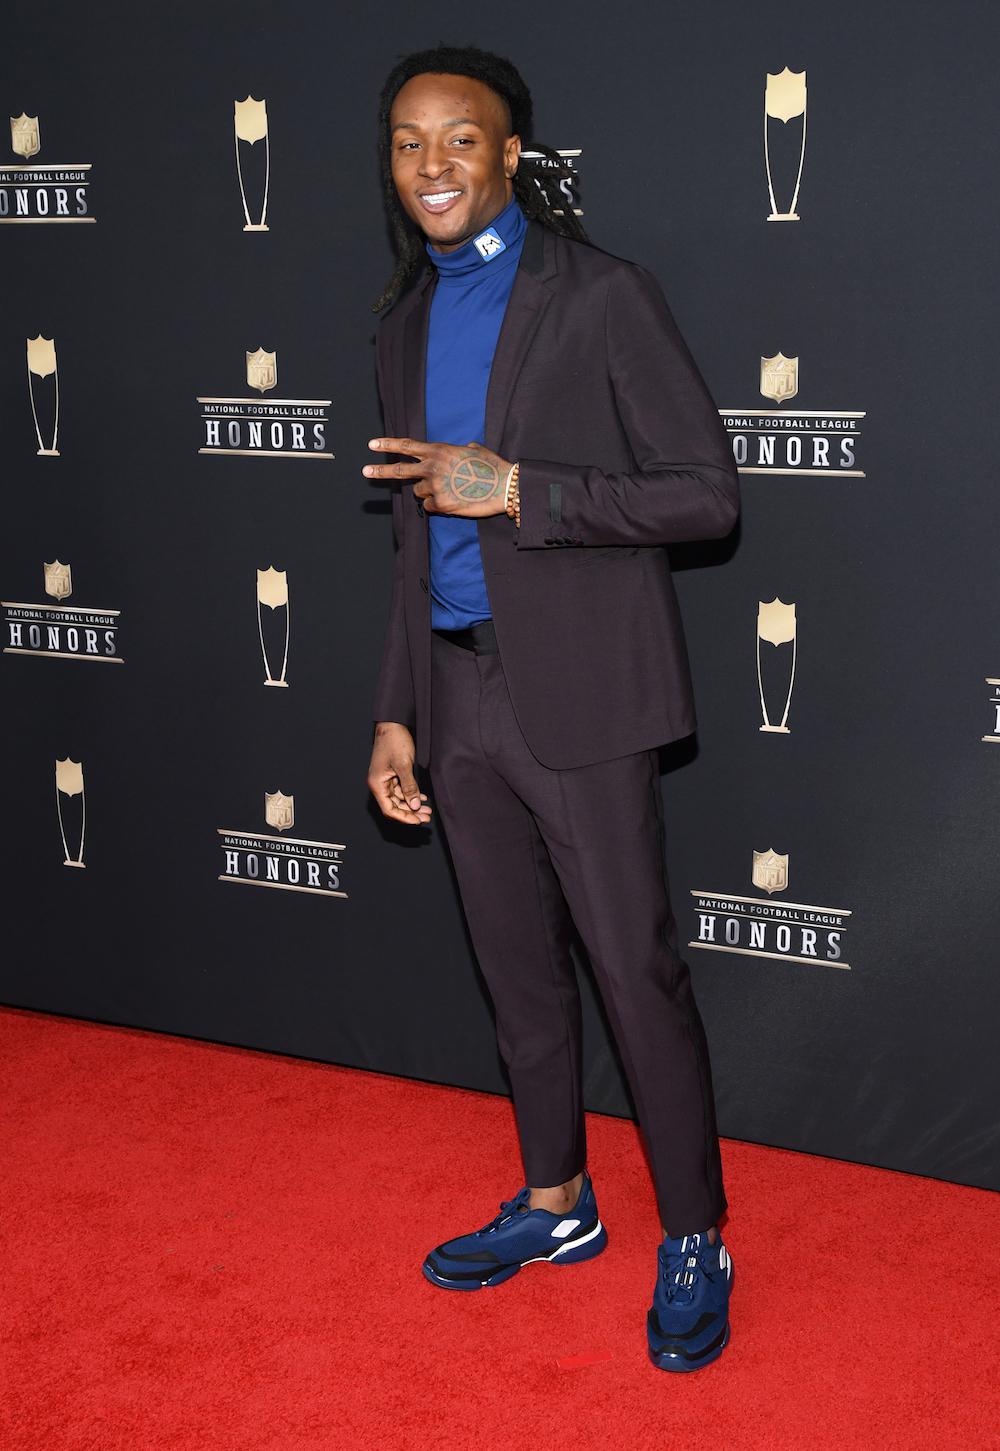 Hopkins attends the 8th Annual NFL Honors at The Fox Theatre in Atlanta, Georgia, on Feb. 2, 2019. (©Getty Images | <a href="https://www.gettyimages.com/detail/news-photo/player-deandre-hopkins-attends-the-8th-annual-nfl-honors-at-news-photo/1126996498">Jason Kempin</a>)